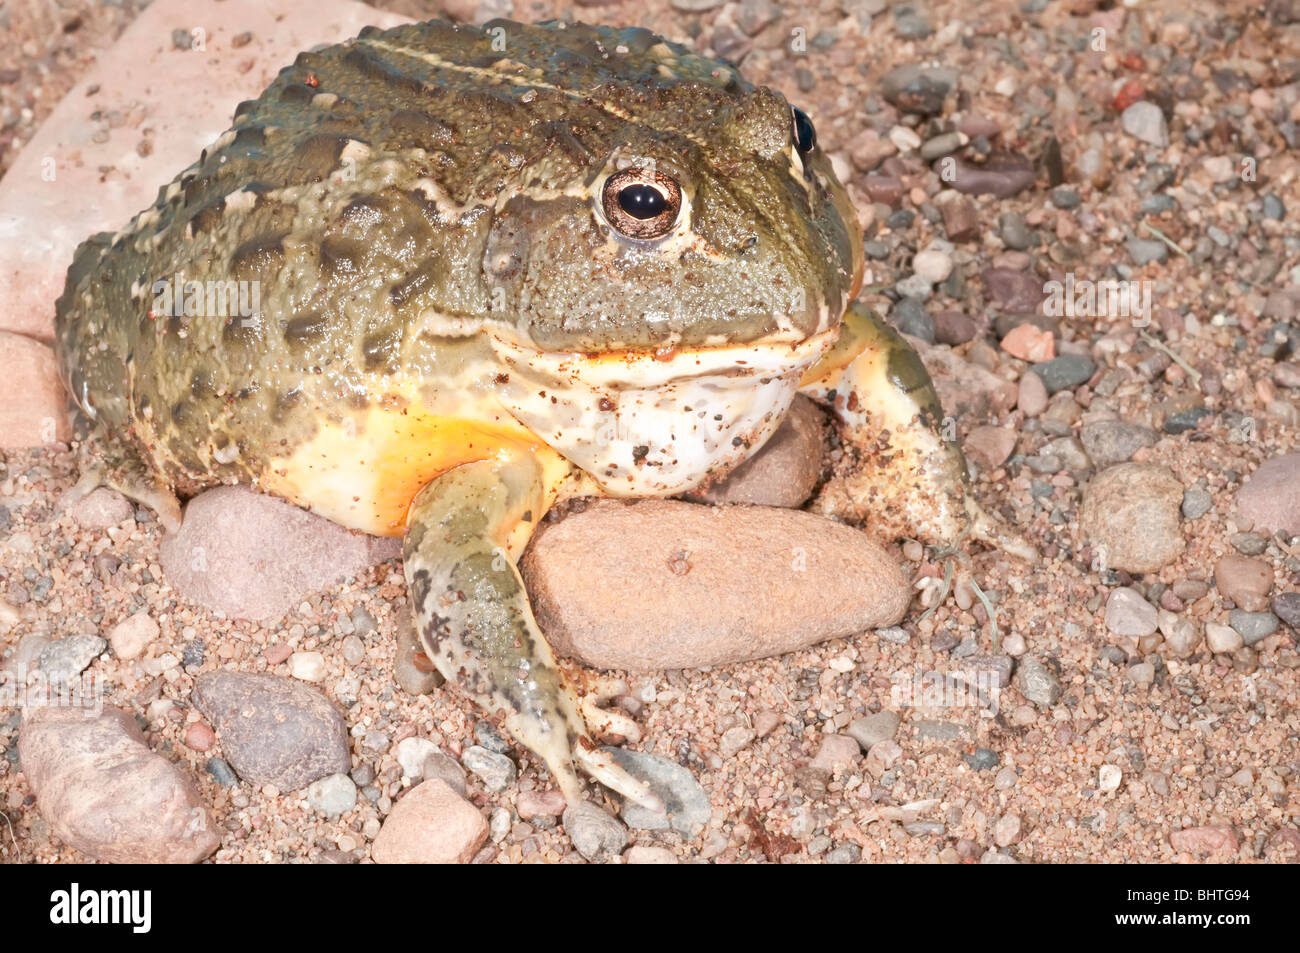 Are African Bullfrogs Aggressive?